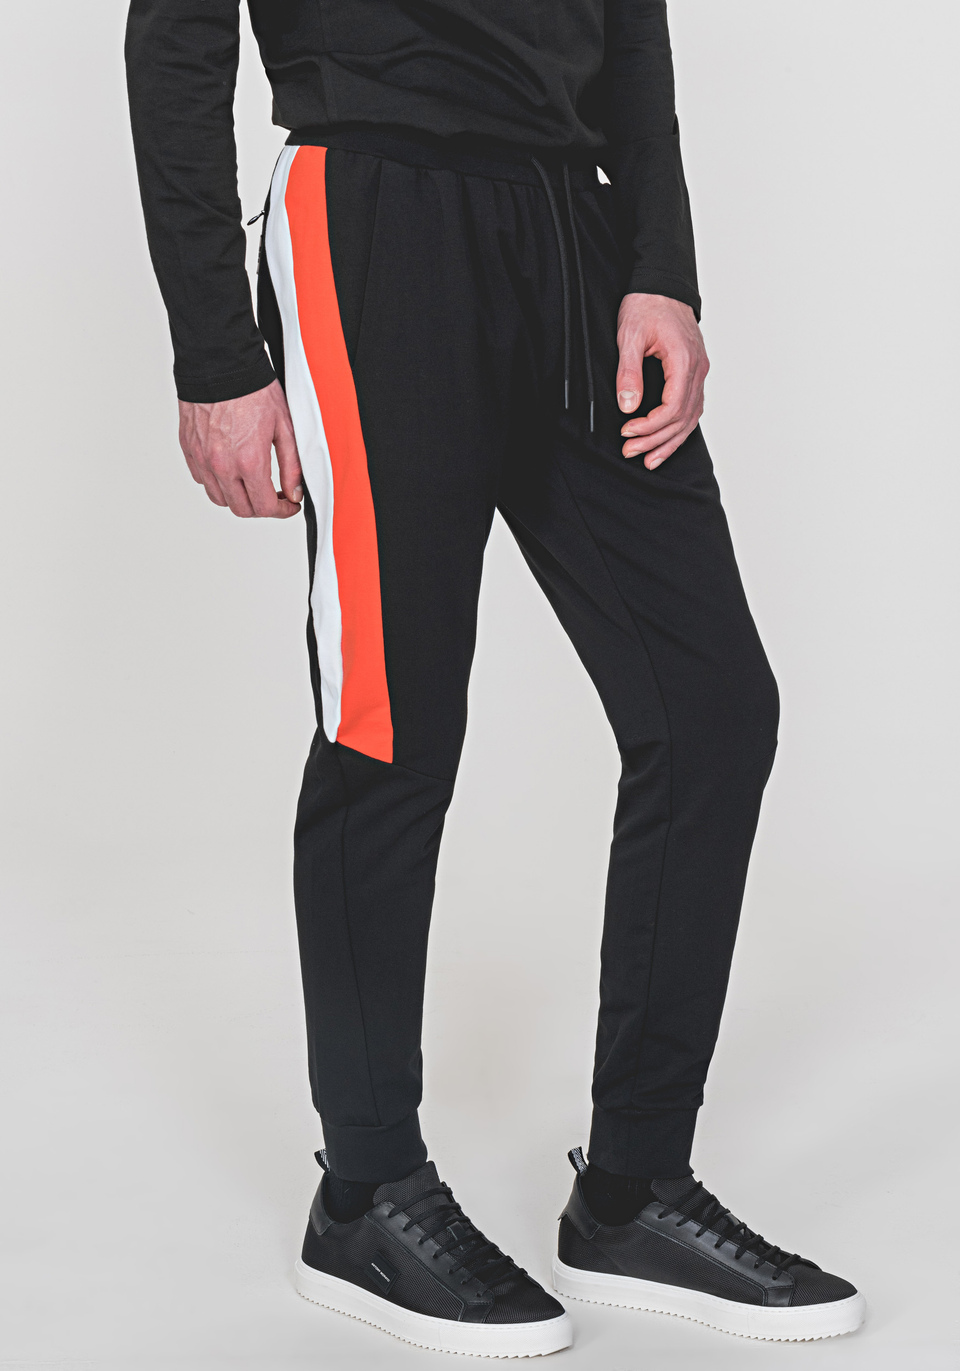 COTTON JOGGERS WITH CONTRASTING BANDS ON THE SIDES - Antony Morato Online Shop